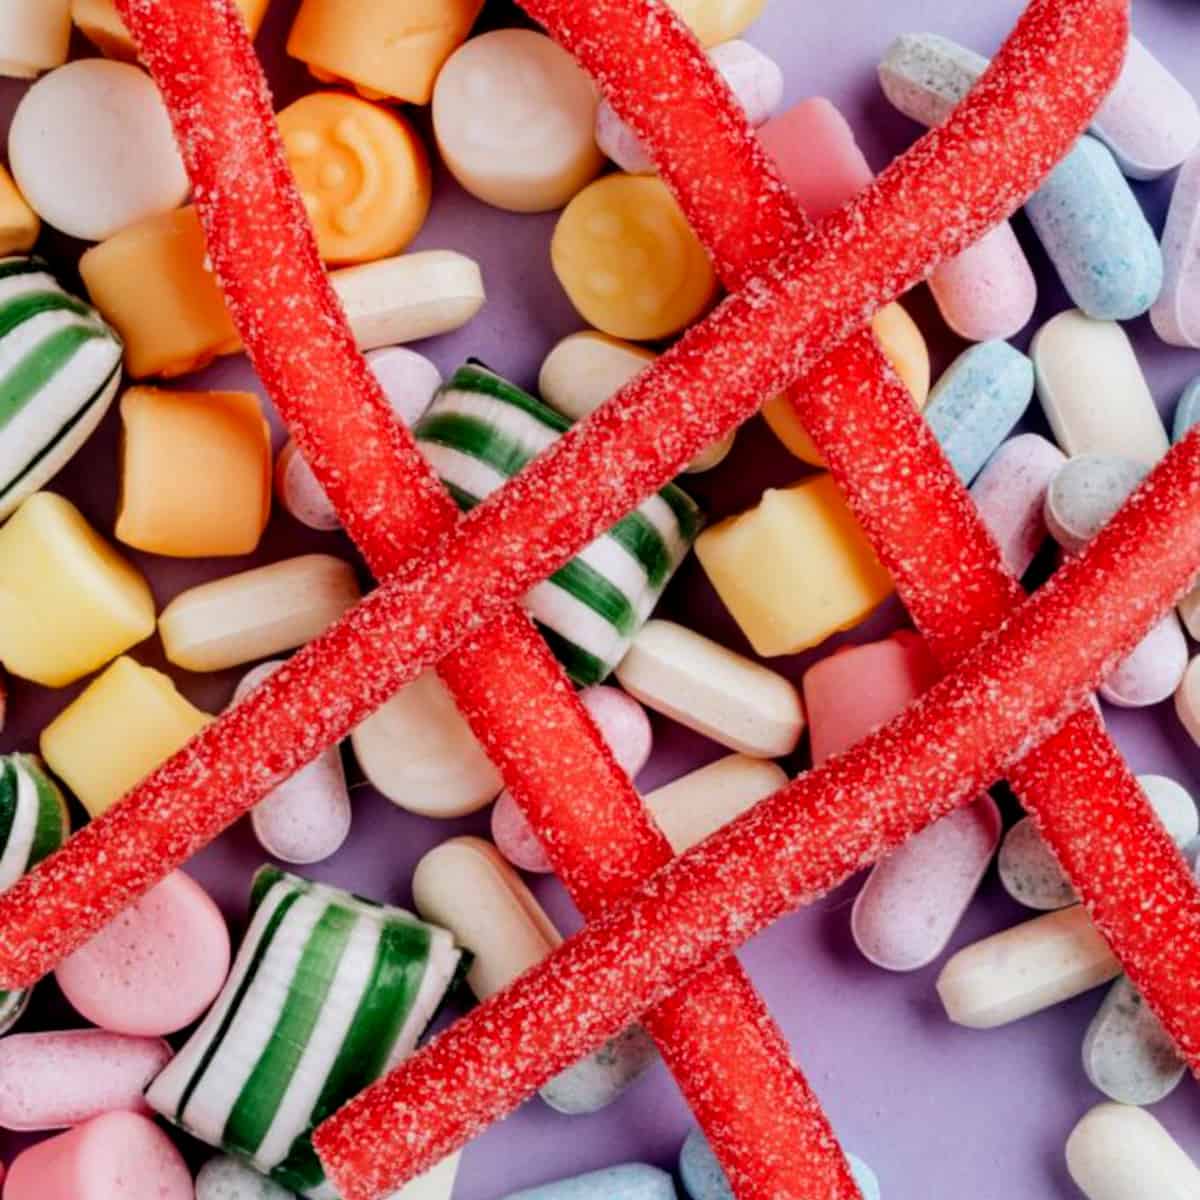 processed candy with refined sugar -ingredients to avoid